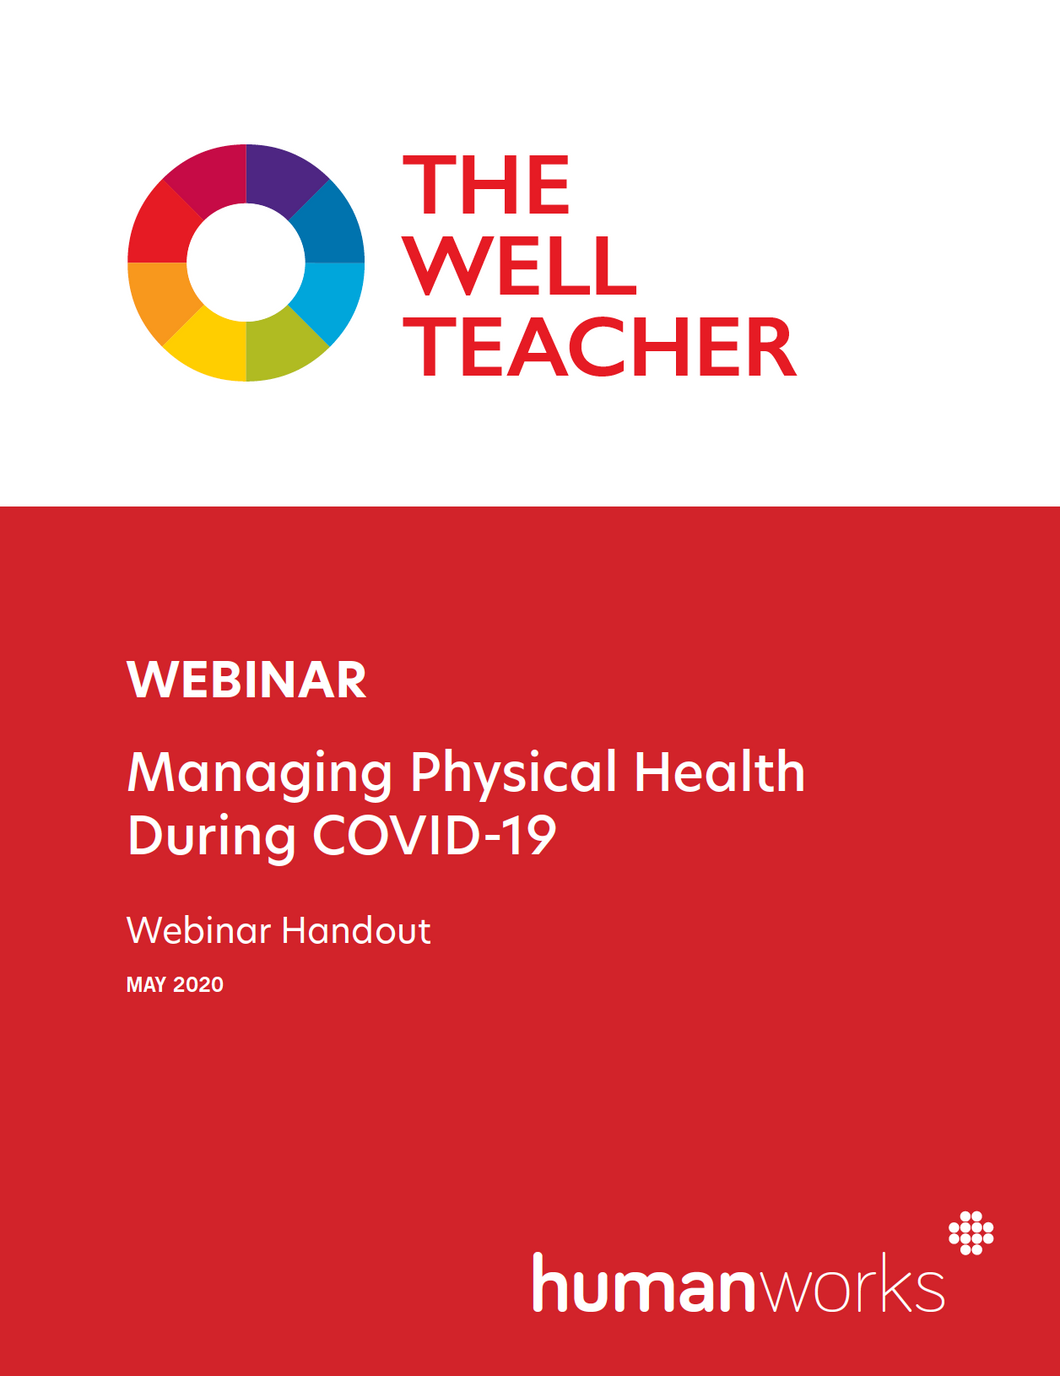 The Well Teacher Webinar Managing Physical Health During COVID-19 handout title page